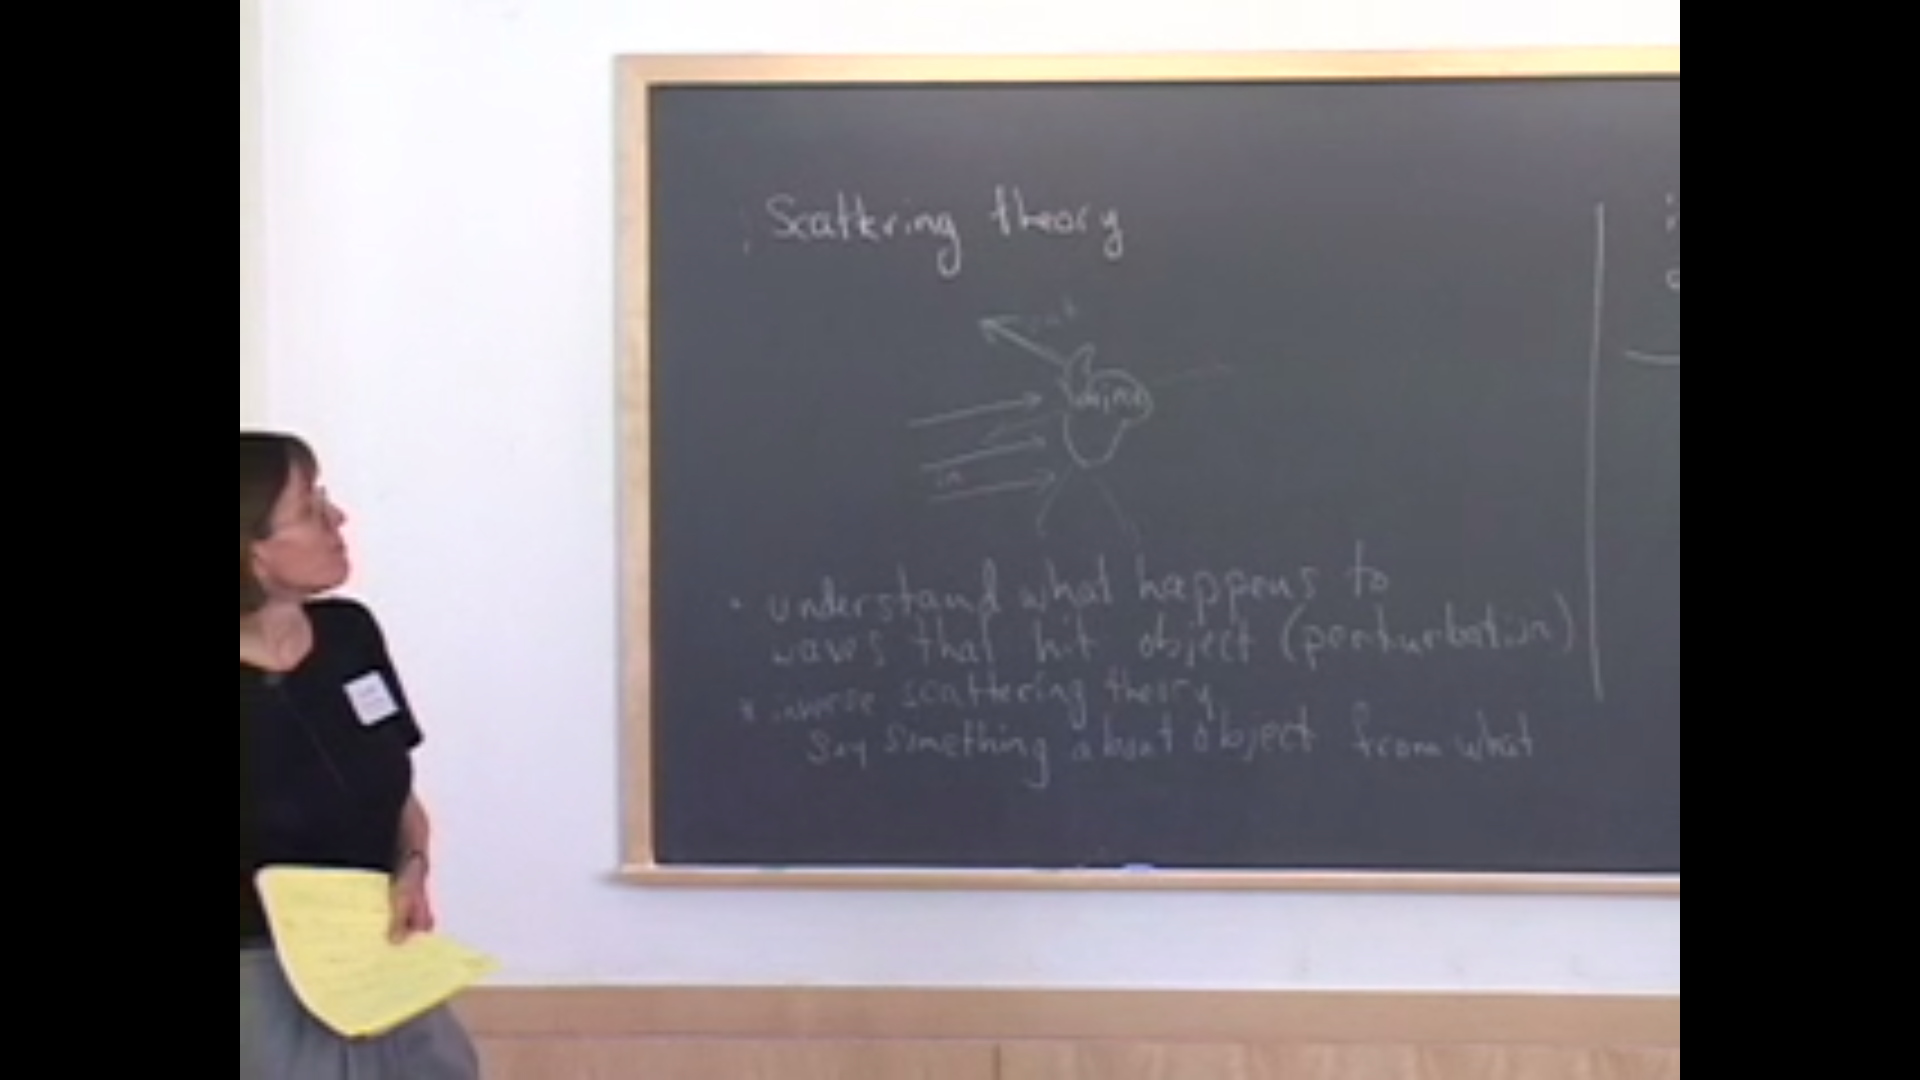 Scattering theory Thumbnail